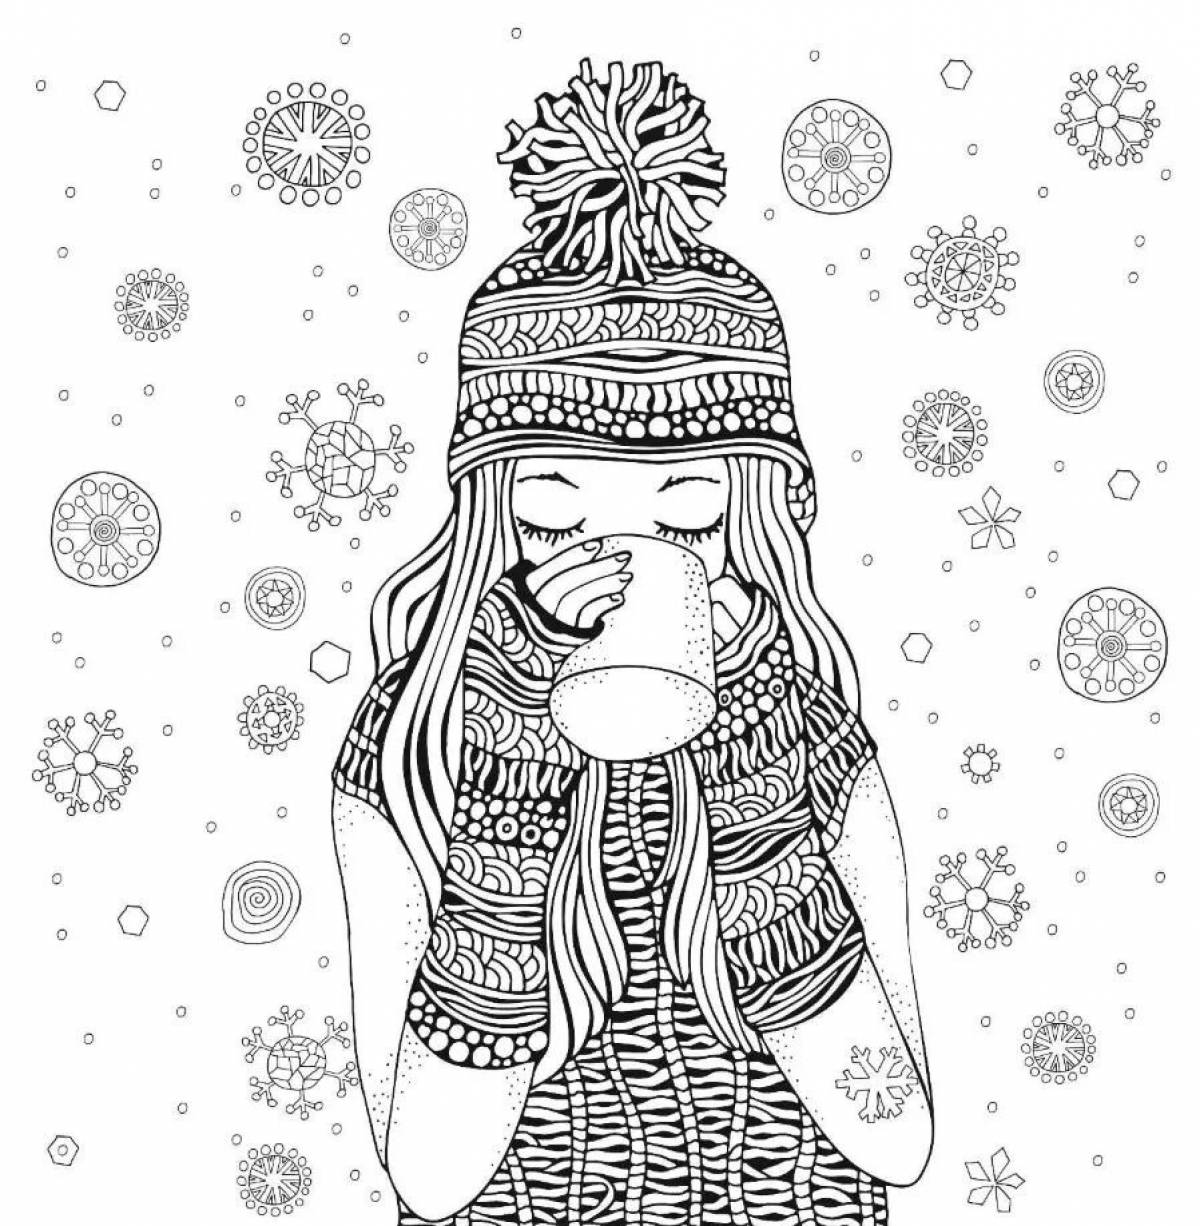 Animated anti-stress coloring book for teens